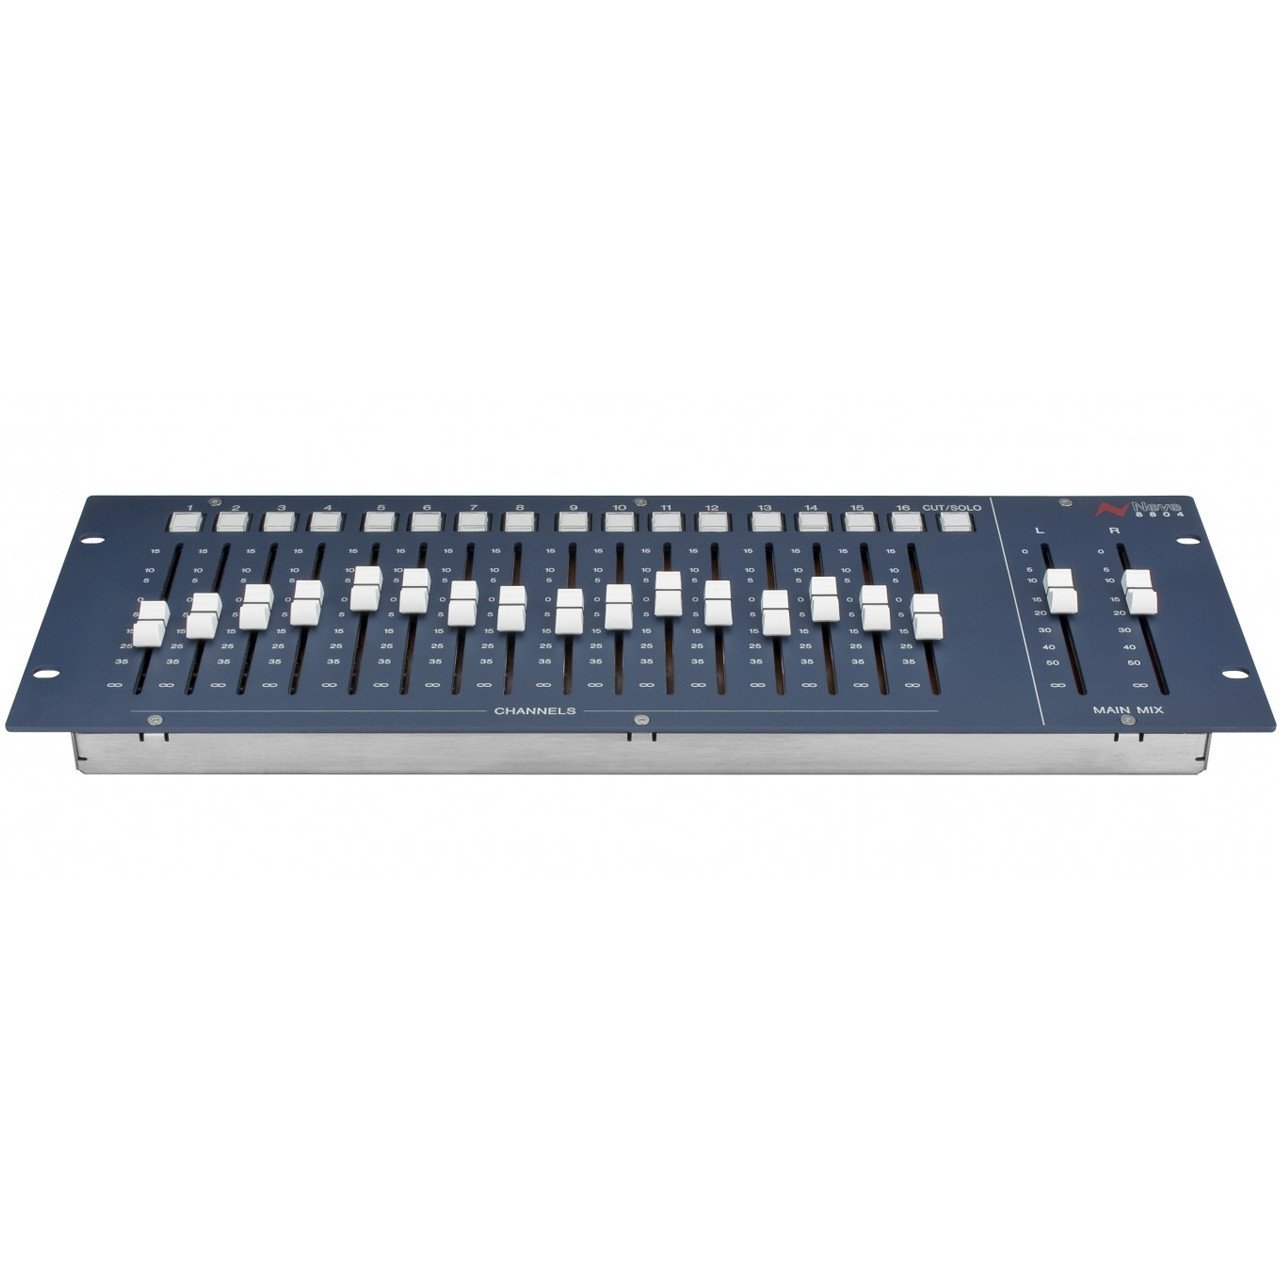 Control Surfaces - Neve AMS 8804 Fader Pack For The 8816 Summing Mixer